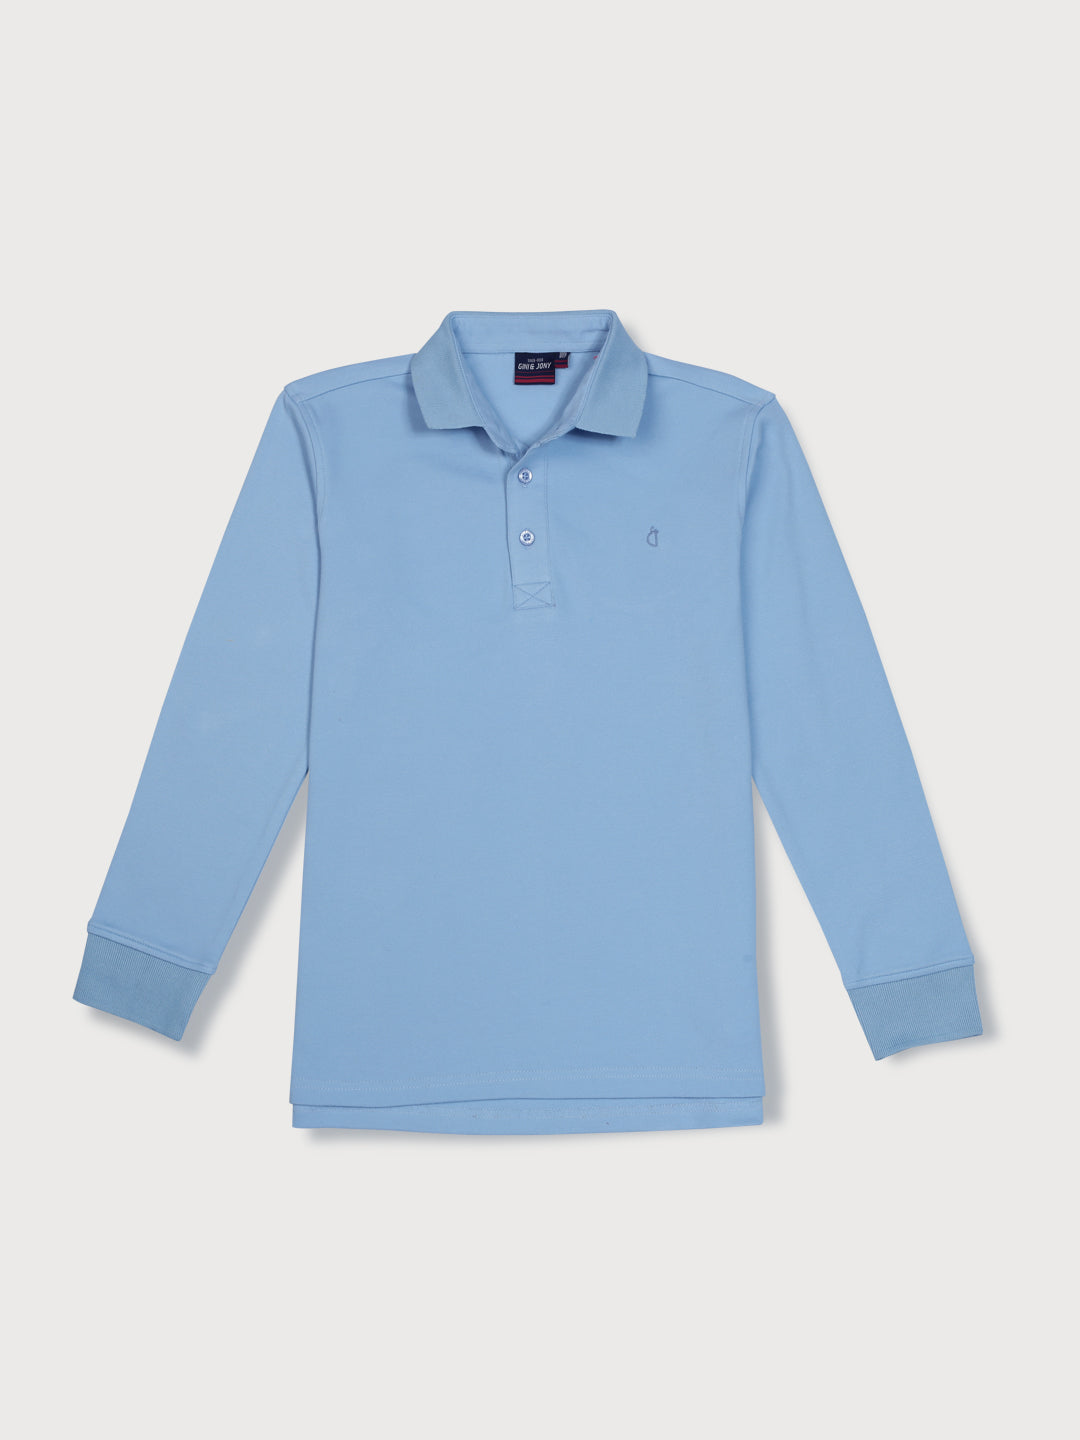 Boys Blue Solid Woven Polo T-Shirt